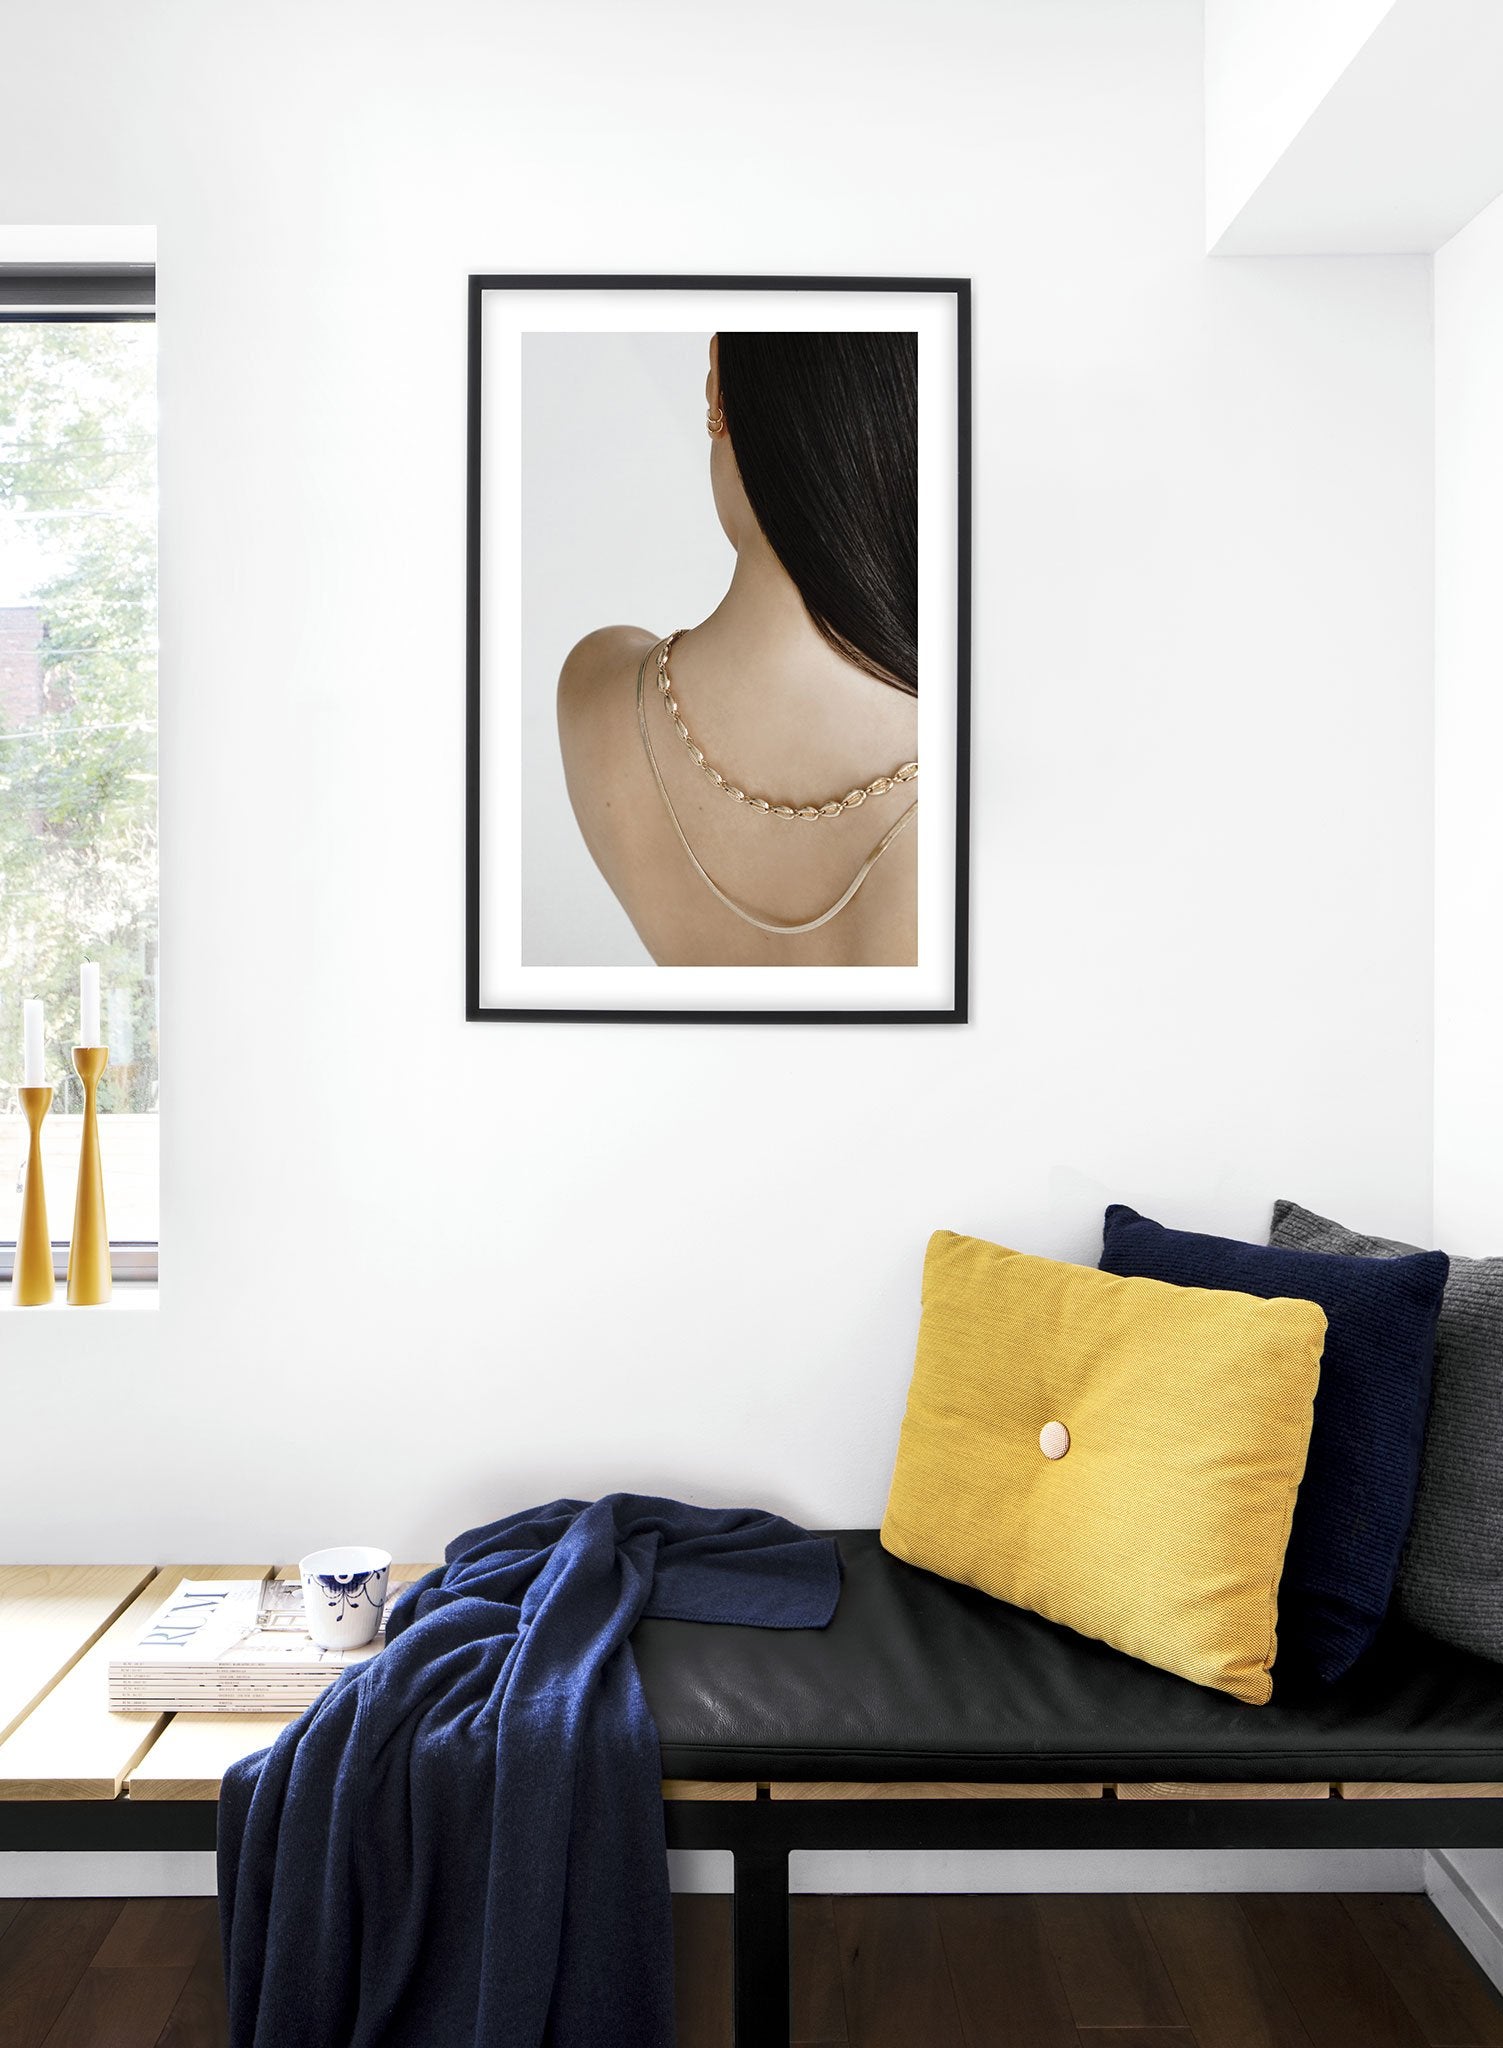 Fashion photography poster by Opposite Wall with naked shoulder of woman - Lifestle - Bedroom